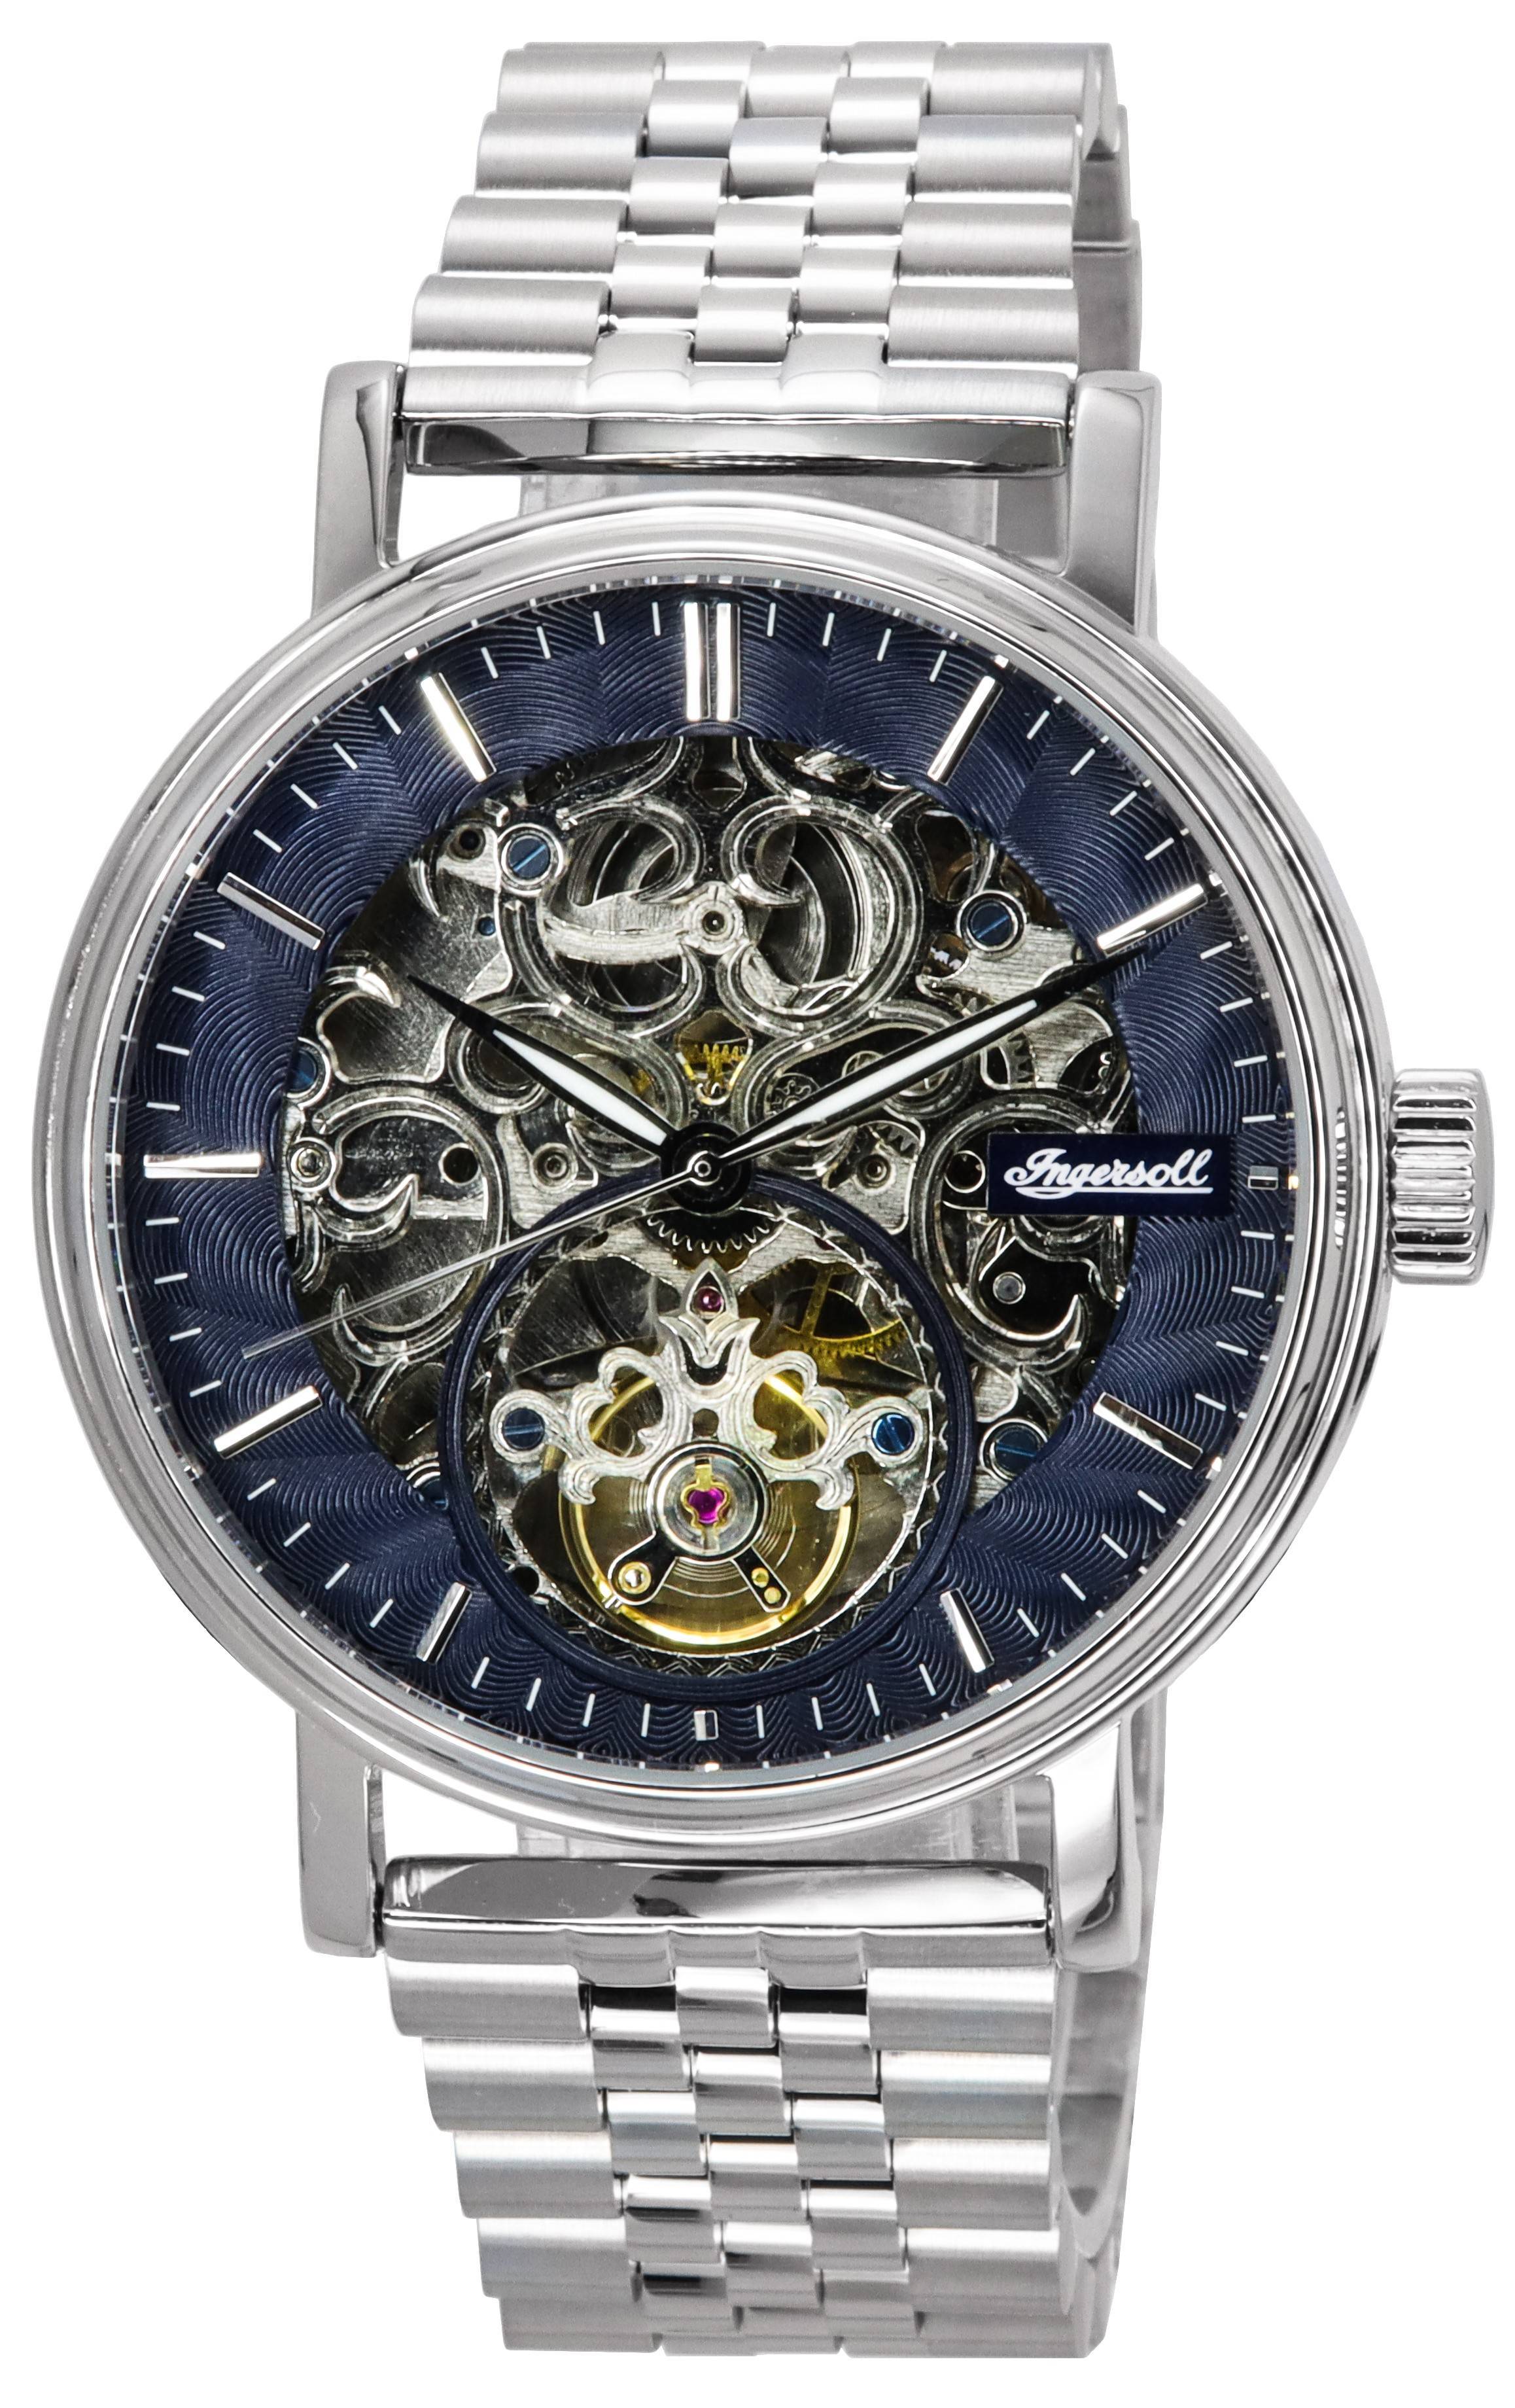 Ingersoll The Charles Stainless Steel Black Skeleton Dial Automatic I05807 Men's Watch